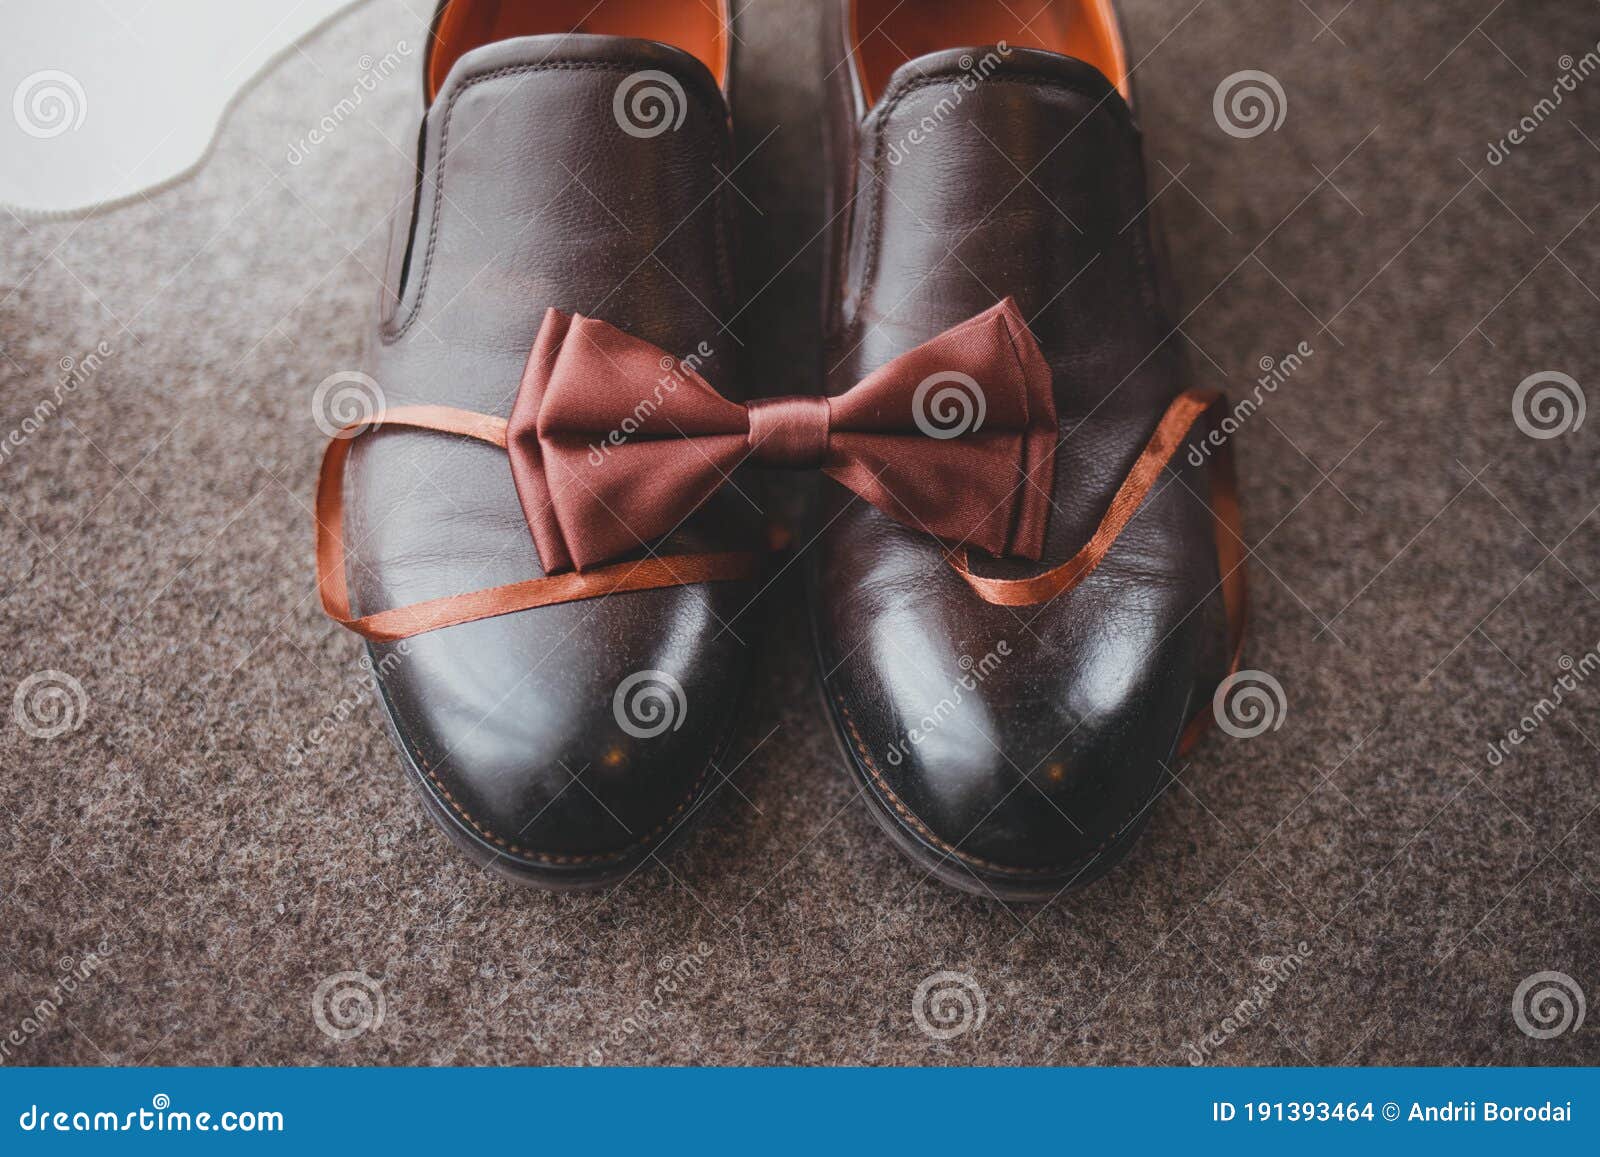 Wedding Shoes Men with Bowtie. Bowtie Lies on Leather Shoes Stock Photo ...